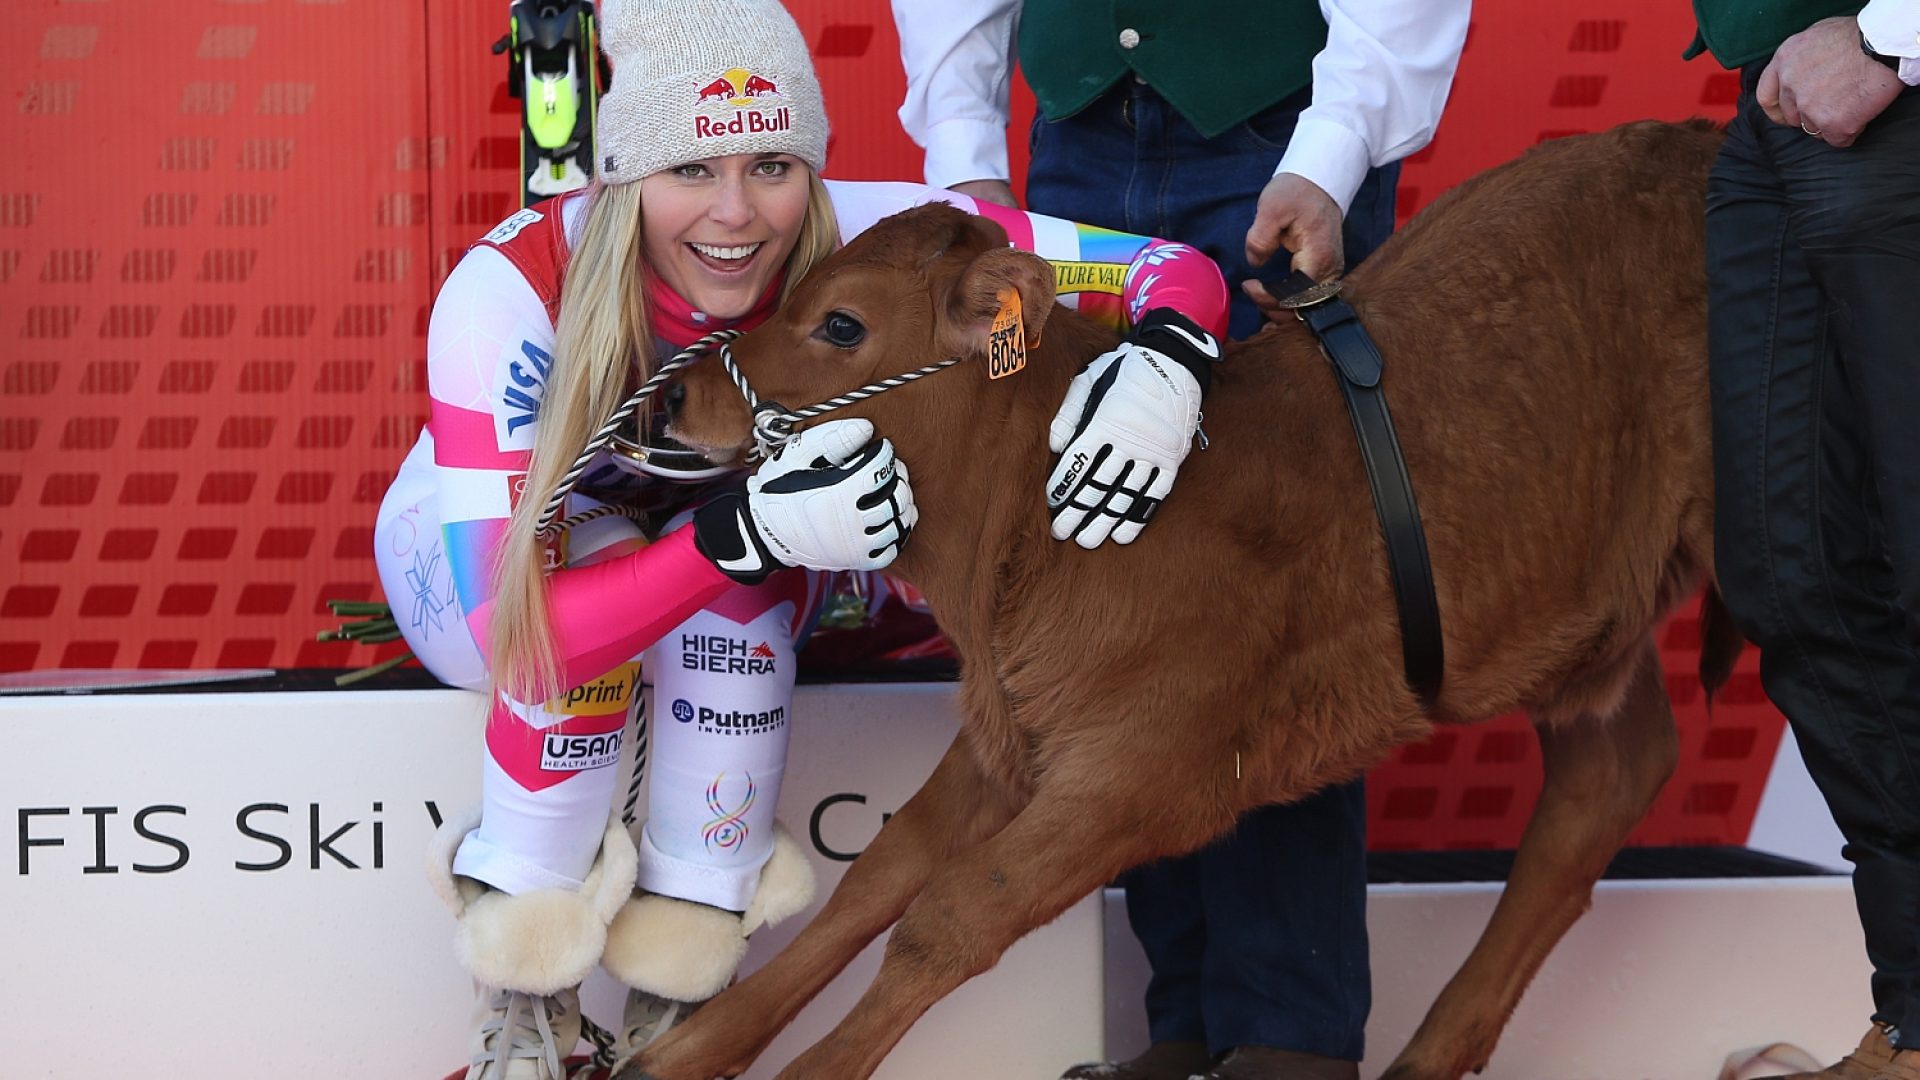 after-her-downhill-win-lindsey-received-a-very-fancy-prize-a-one-month-young-calf-that-she-called-winnie